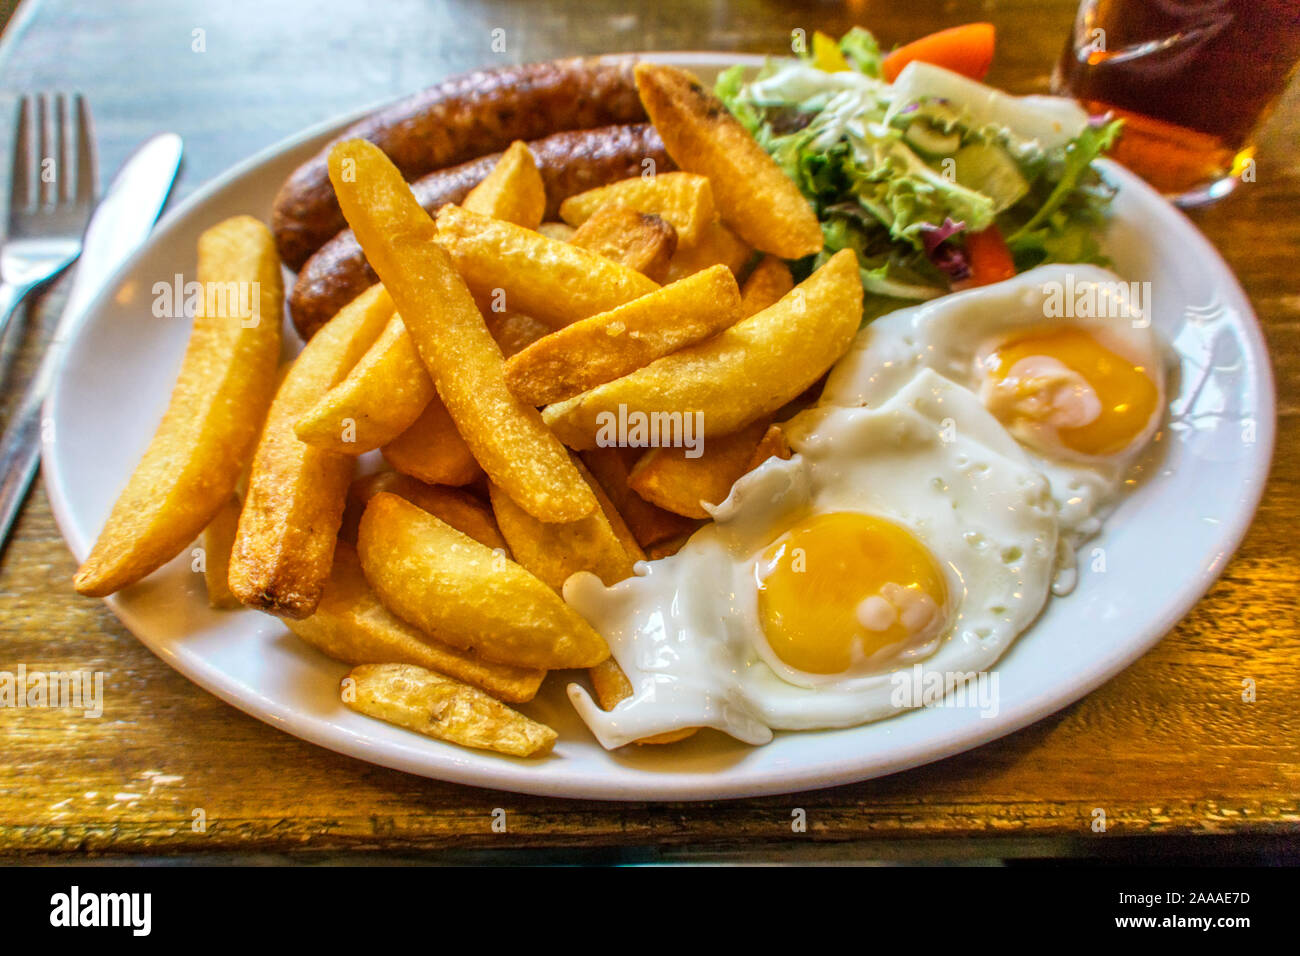 A typical English pub meal of sausage, egg and chips. Stock Photo